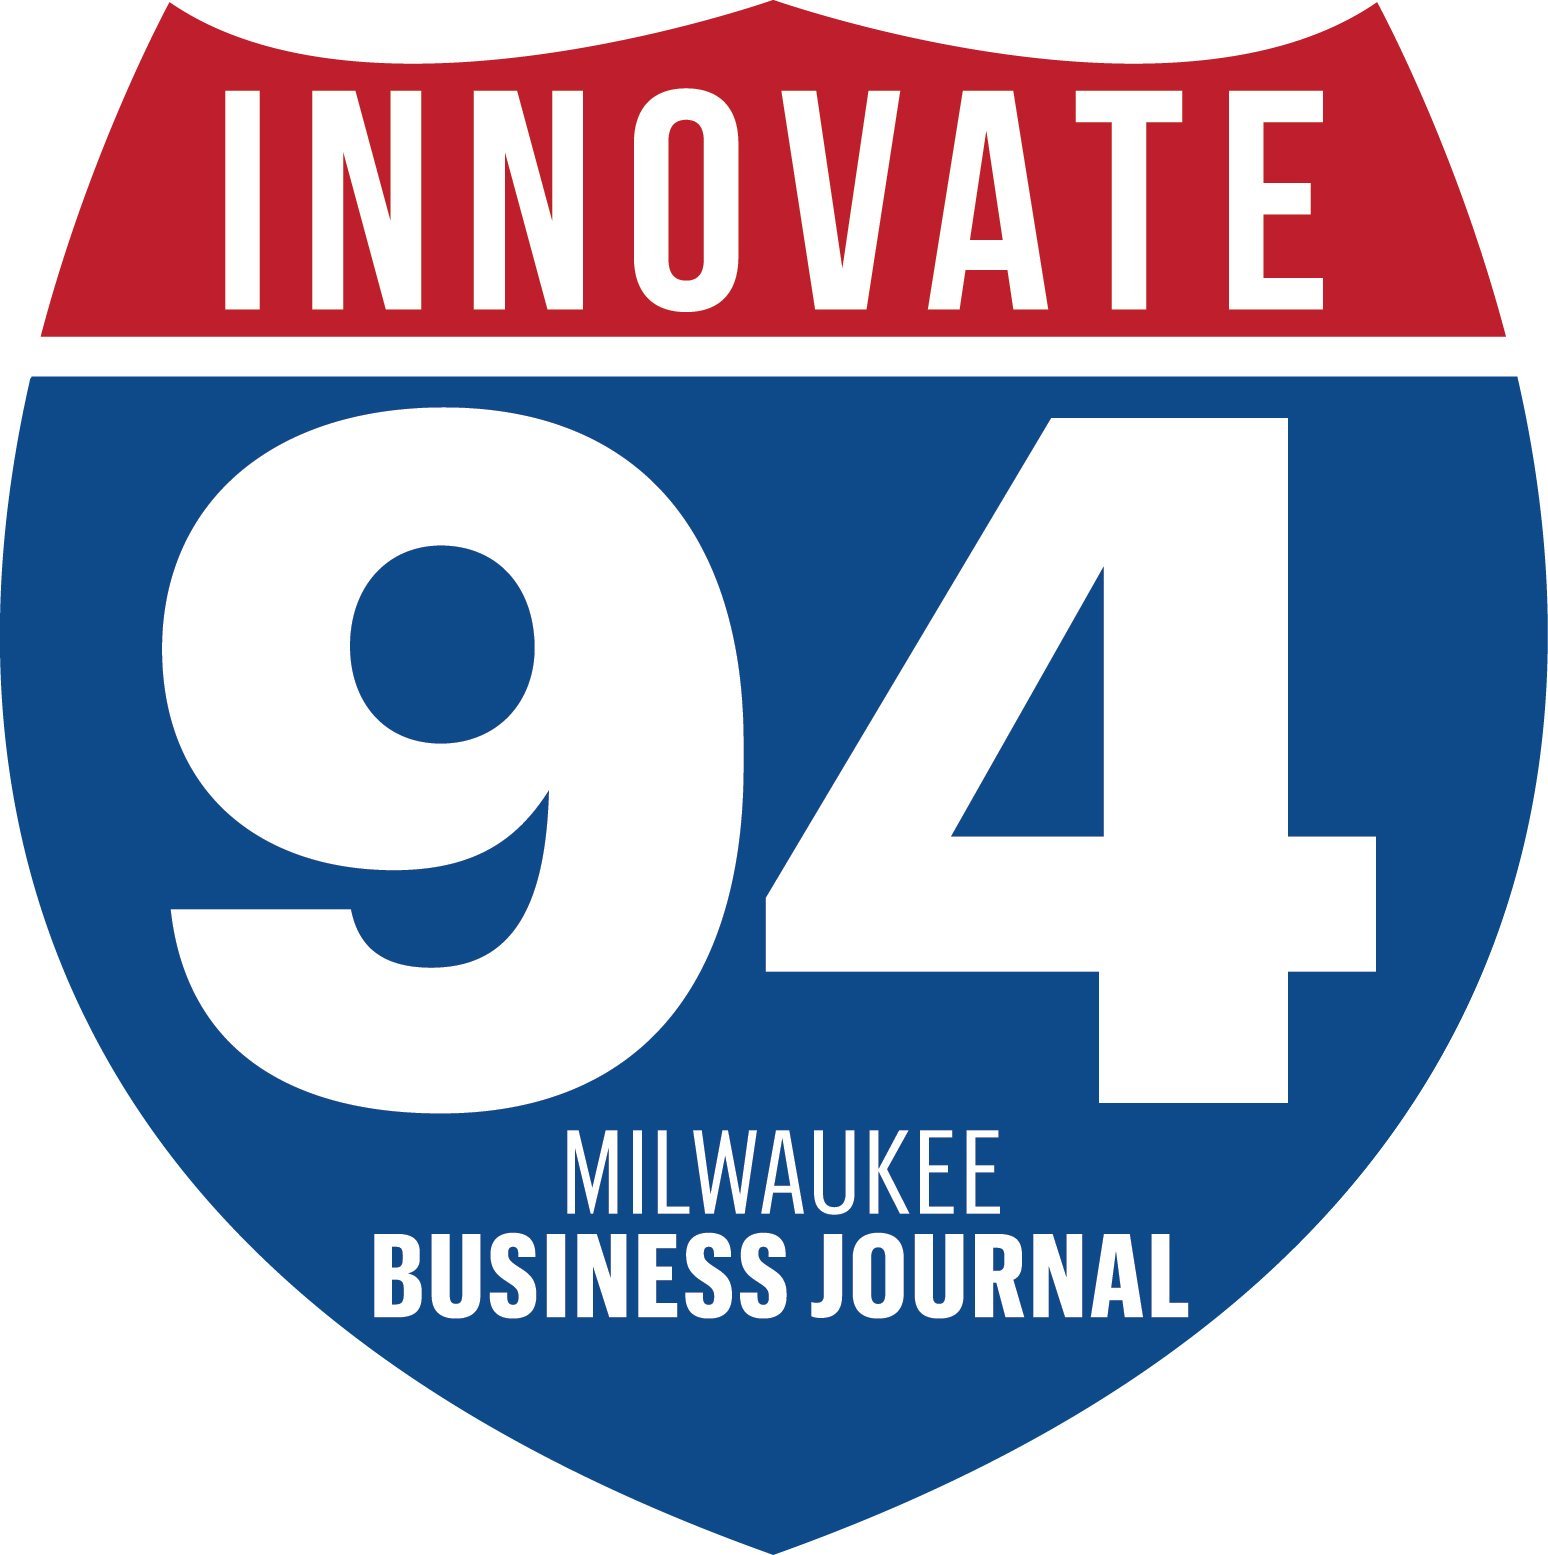 Covering the #innovation economy along I-94 from northern Illinois, through Milwaukee and Madison, to Minneapolis. #Innovate94